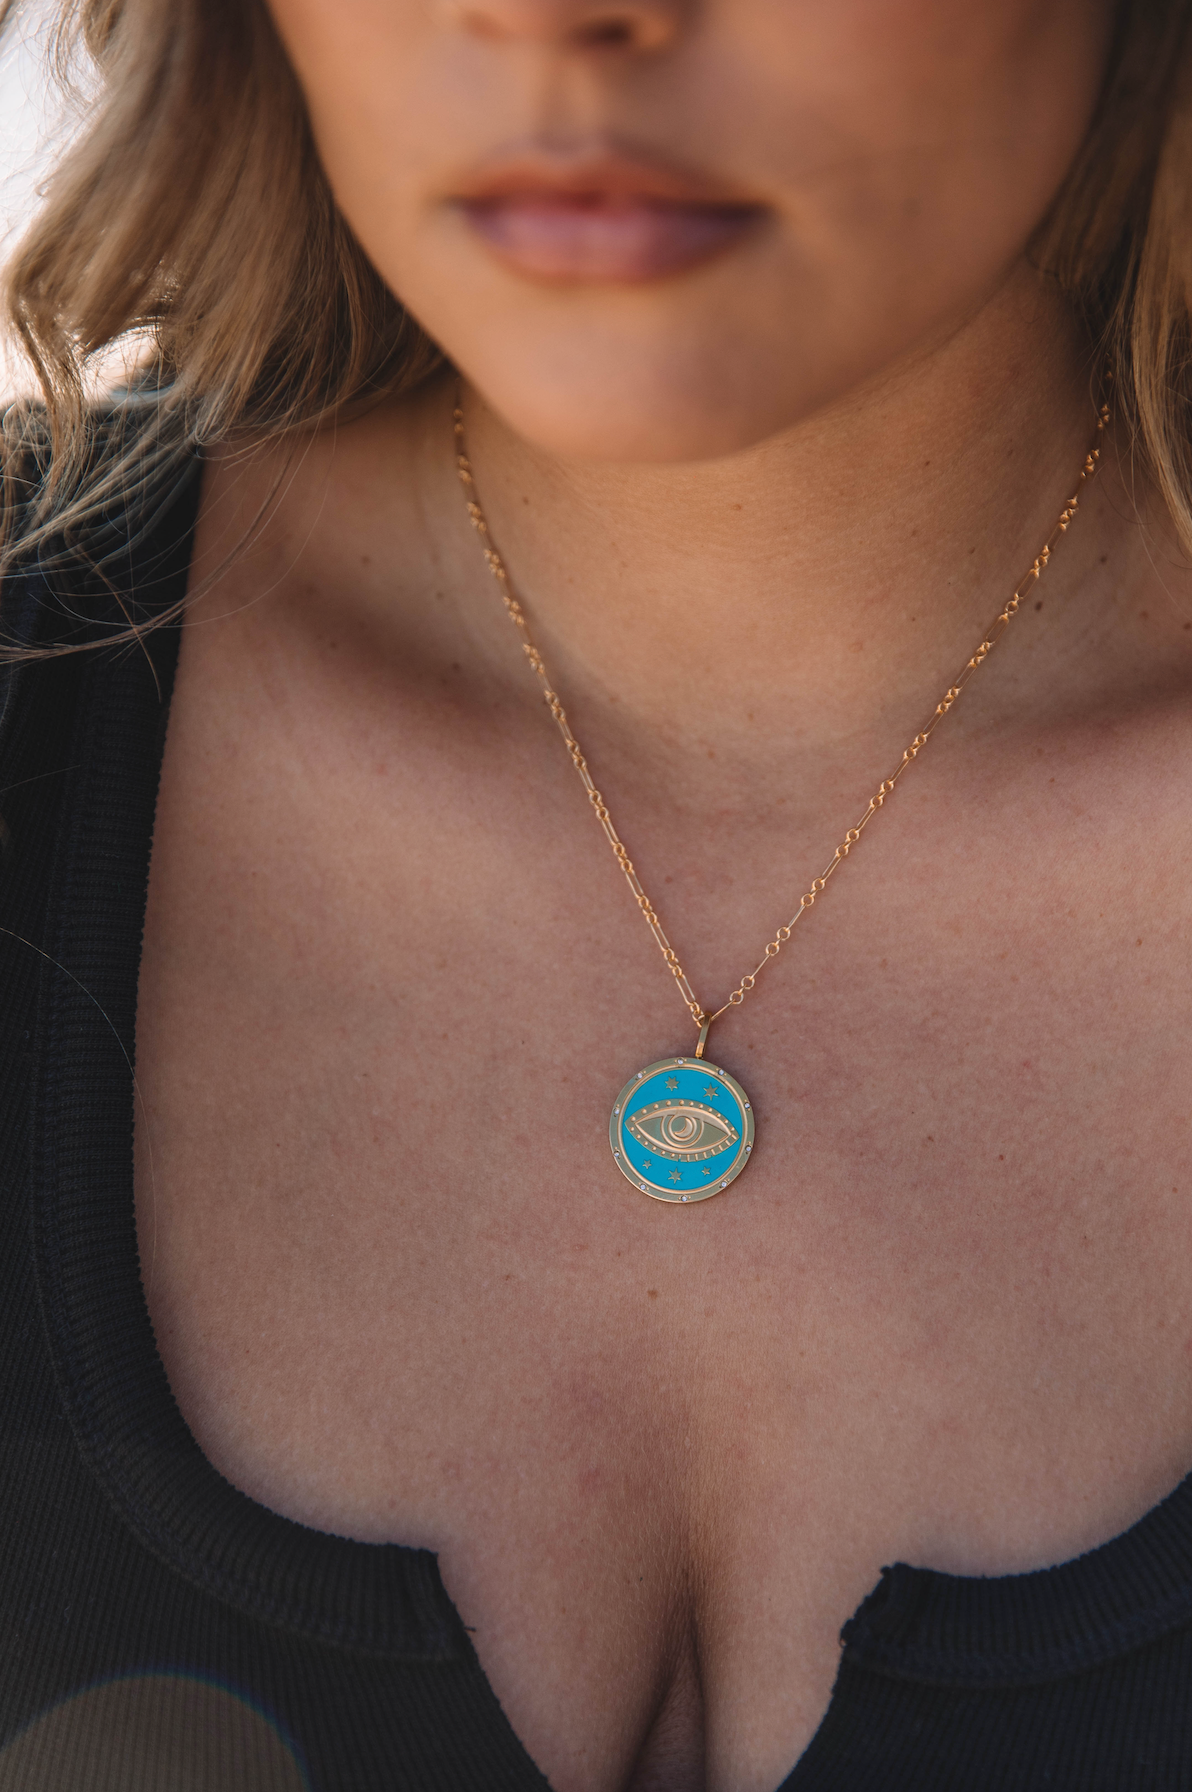 The Dainty Turquoise Eye Necklace